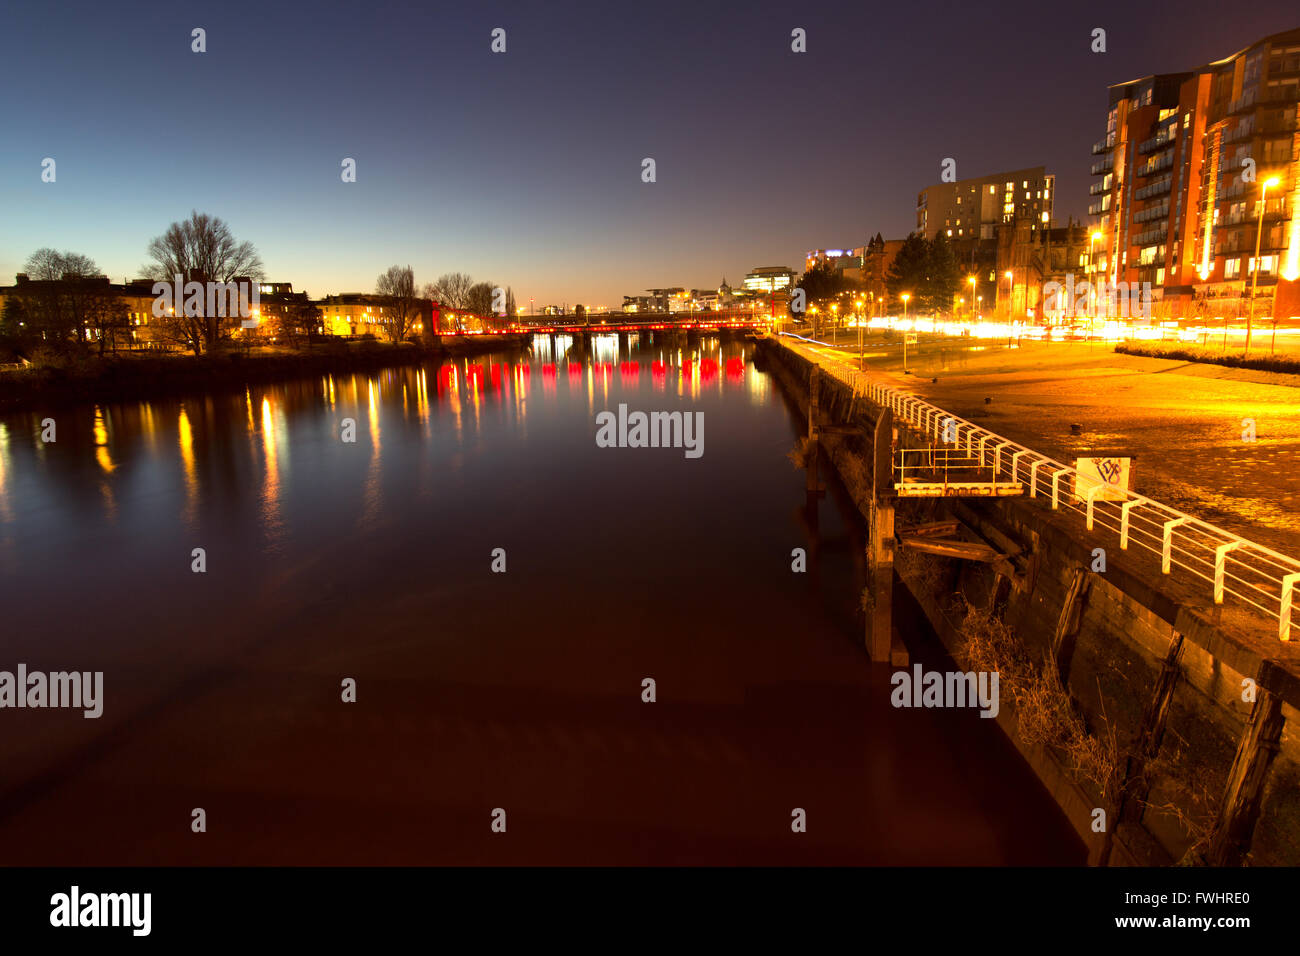 City of Glasgow, Scotland. Picturesque night view of the River Clyde viewed looking west from the Gorbals Street bridge. Stock Photo